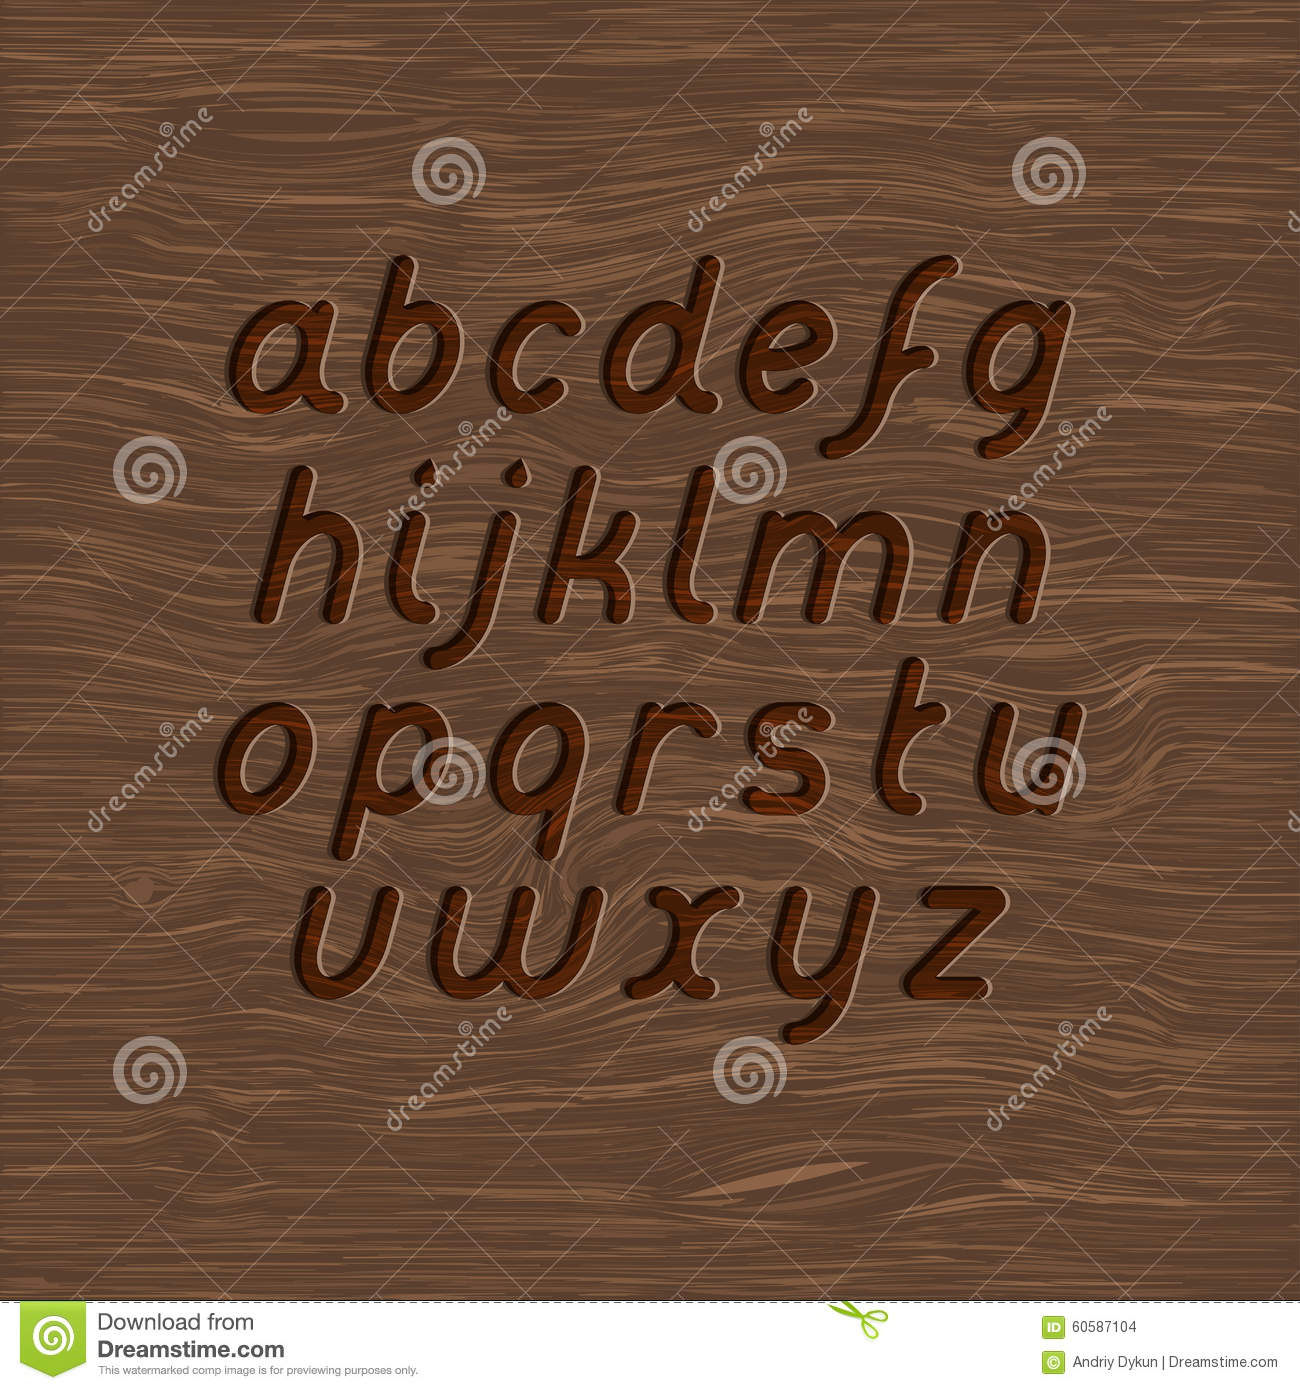 15 Wood Carving Font Images Carved Wood Font Photoshop Wood Carving Fonts Free And Font That Looks Like Carved Wood Newdesignfile Com